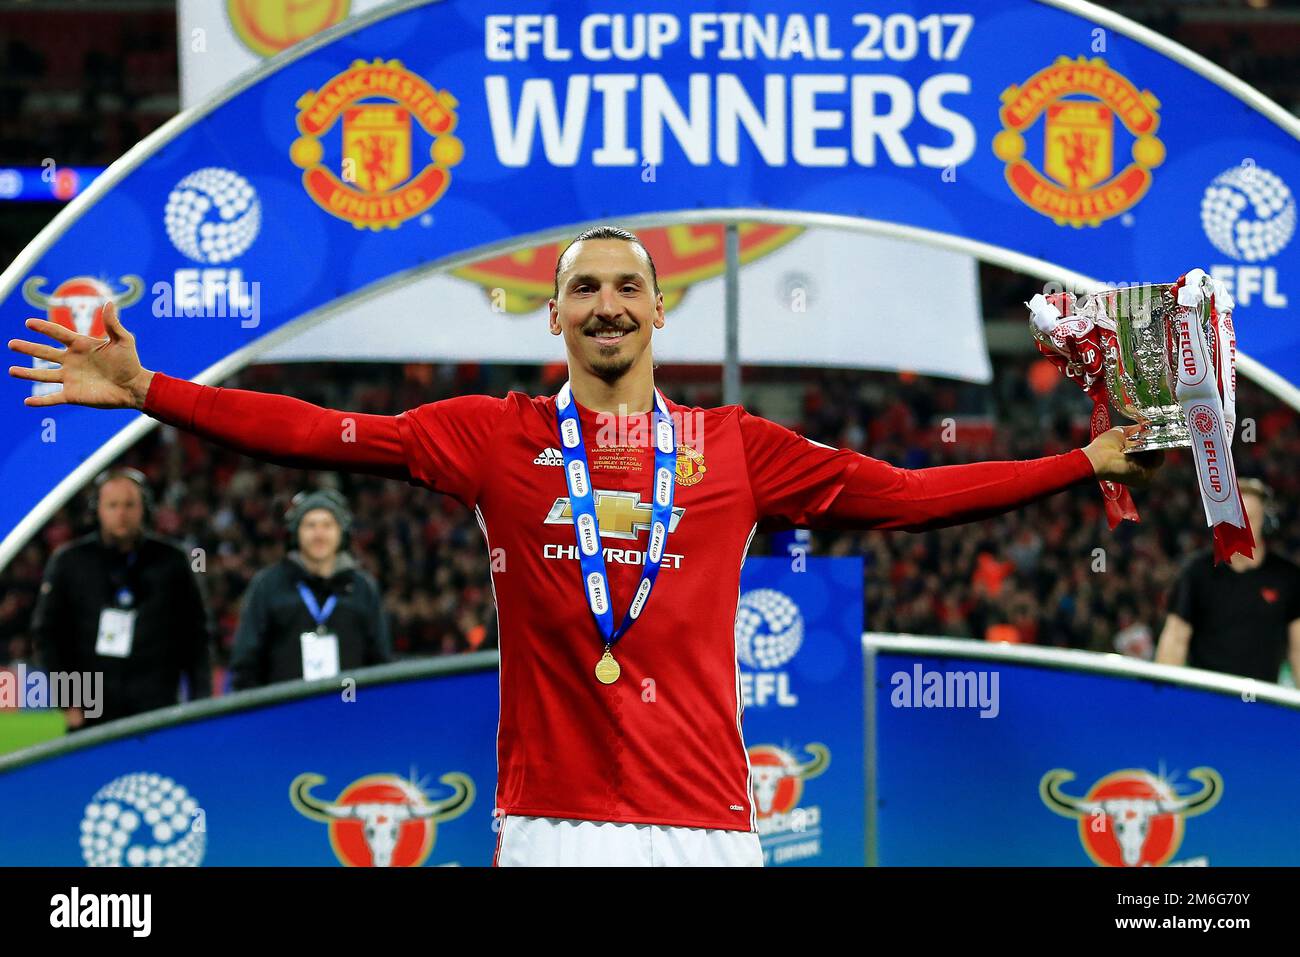 Zlatan Ibrahimovic of Manchester United celebrates with the EFL trophy as Manchester United win the EFL Cup final - Manchester United v Southampton, EFL Cup Final, Wembley Stadium, London - 26th February 2017. Stock Photo